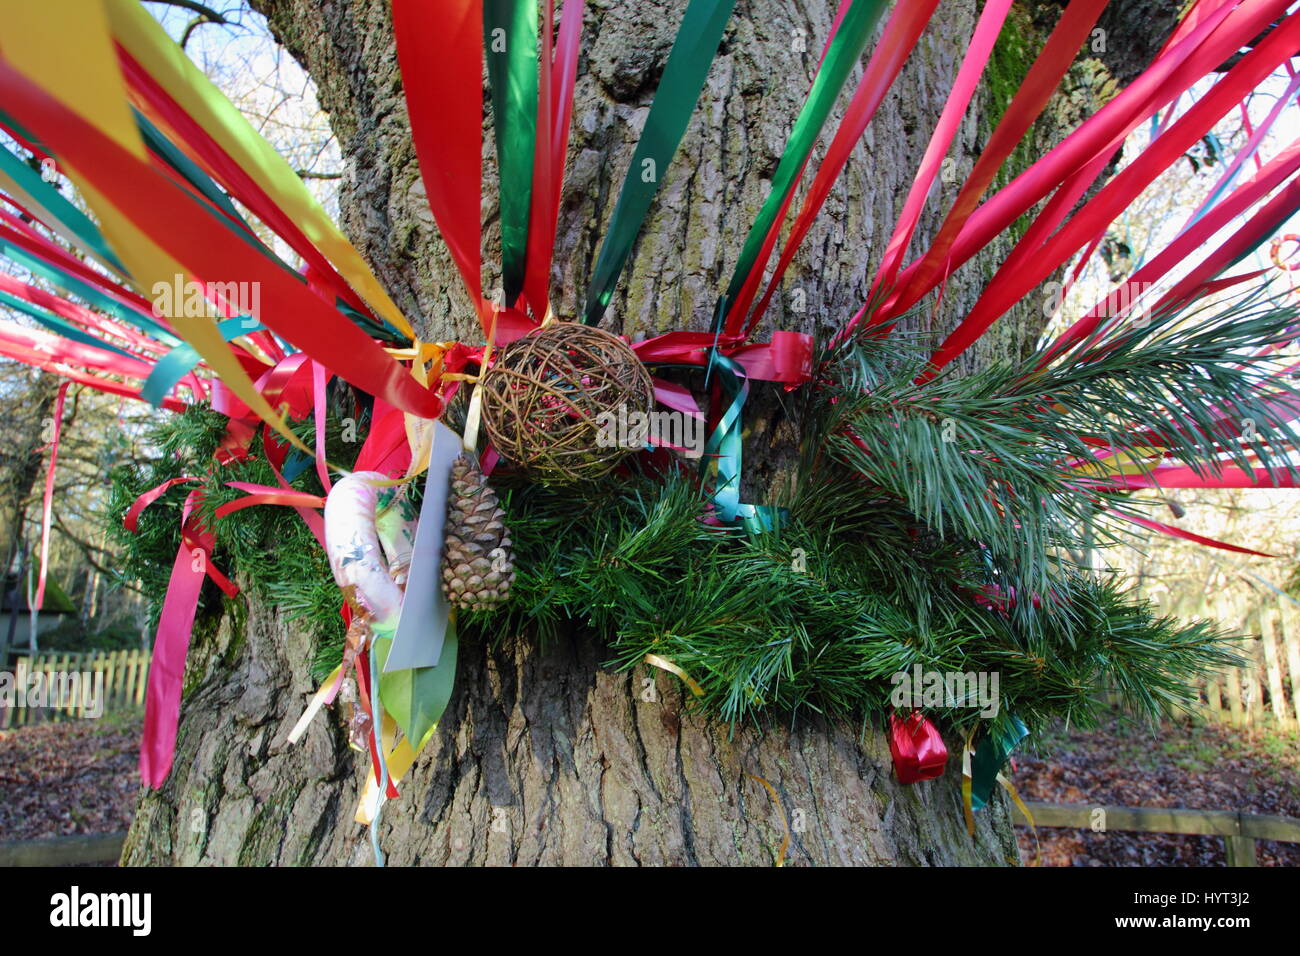 Ribbons and decorations adorn a tree at the annual Tree Dressing event in Sherwood Forest, Nottinghamshire, UK - December Stock Photo